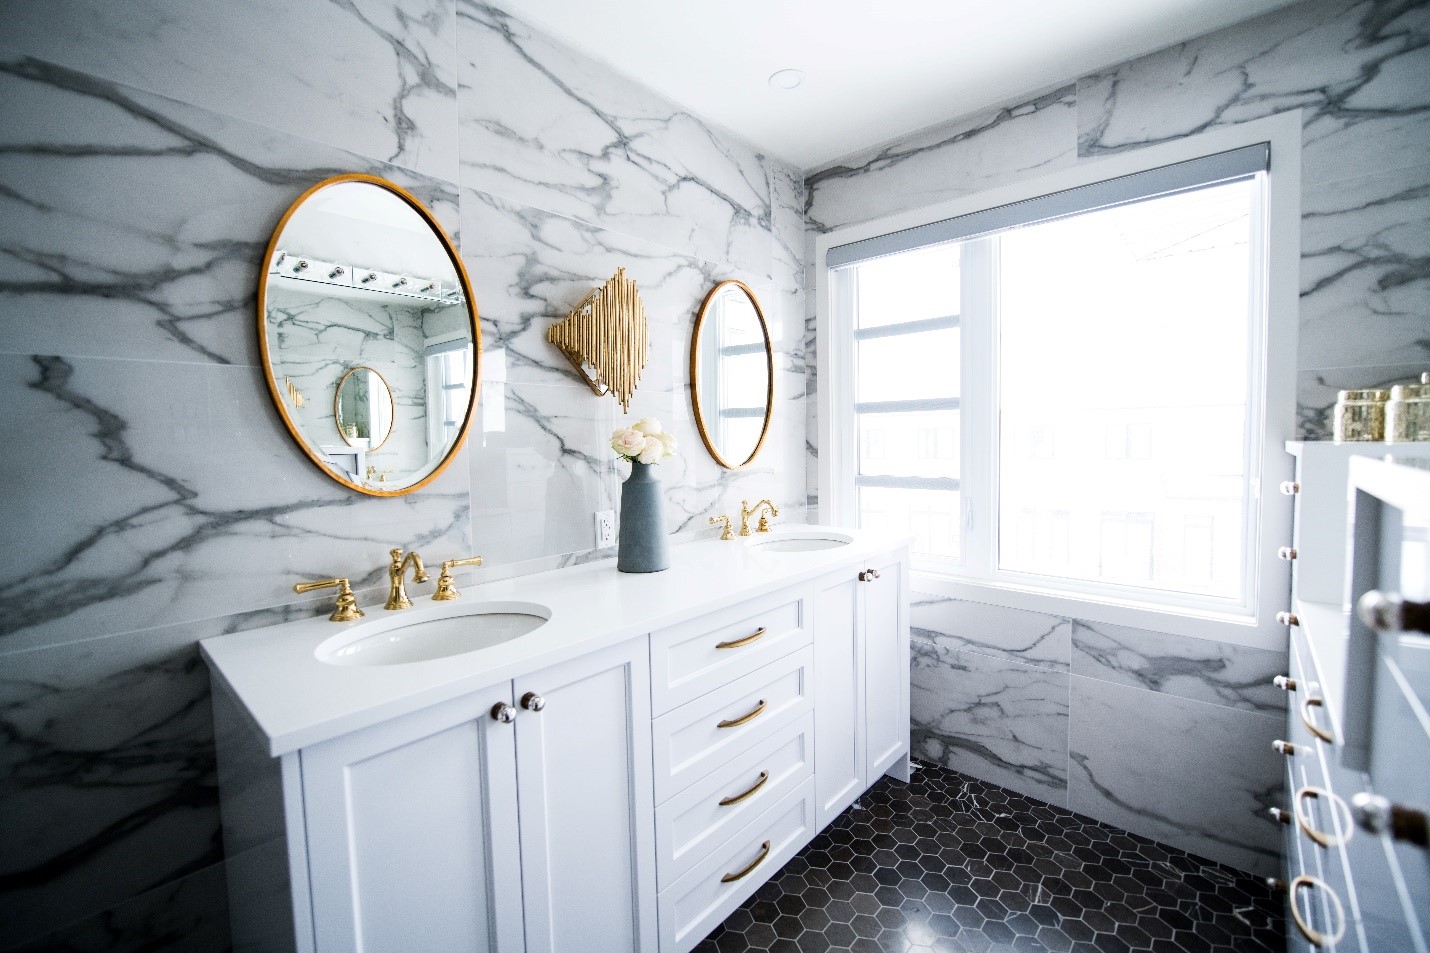 featured image - Planning to Remodel Your Bathroom? Keep These 4 Things in Mind